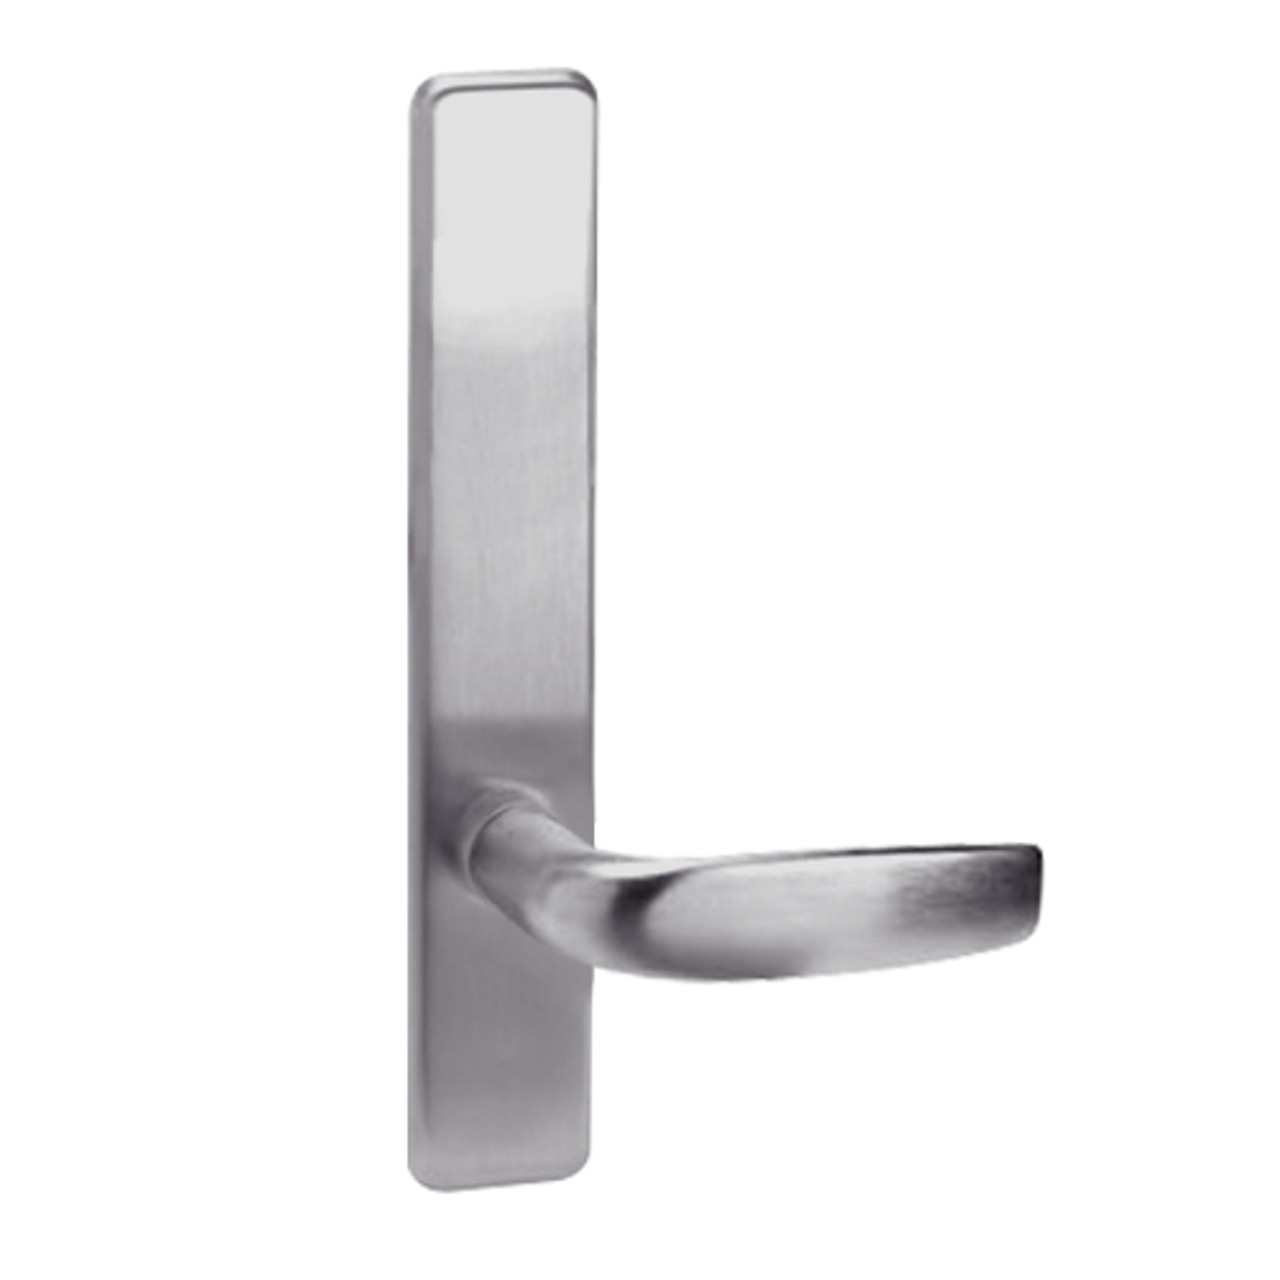 C855-630-RHR Corbin ED4000 Series Exit Device Trim with Classroom Citation Lever in Satin Stainless Steel Finish